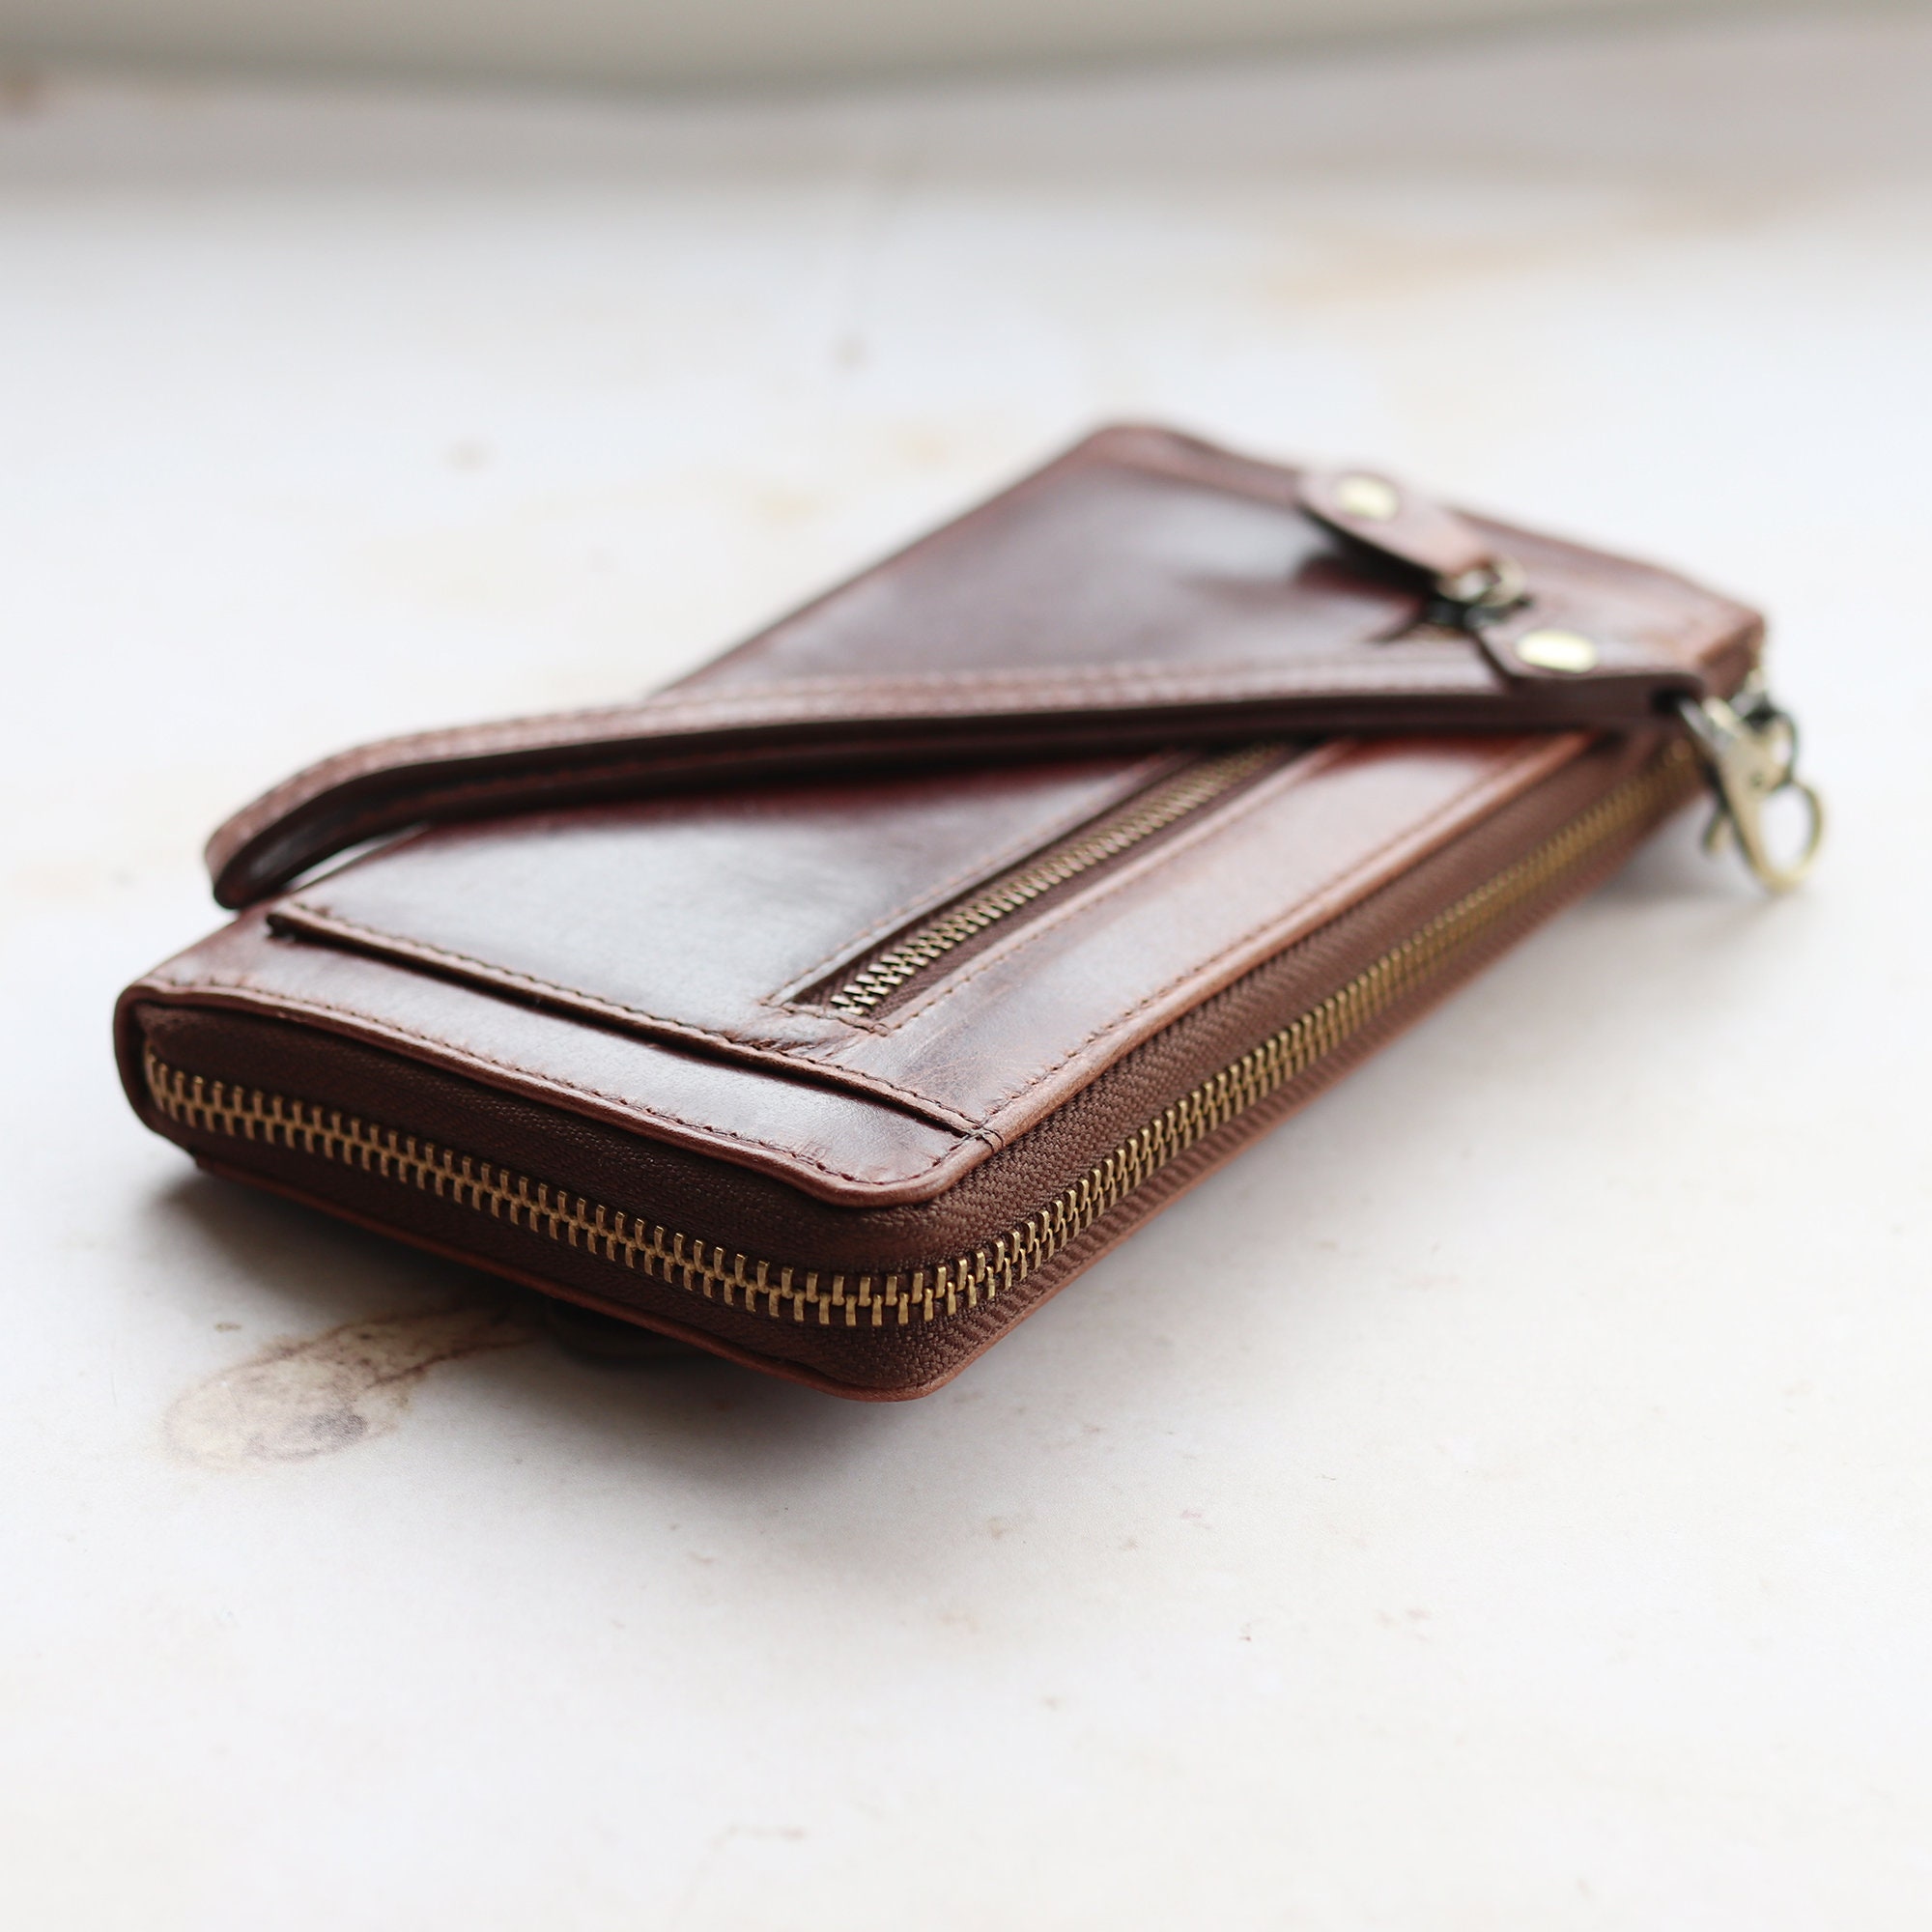 Traditional Lovely Ladies Women Purse Wallet Handbag Gift at Rs 125 |  ladies wallet in Ahmedabad | ID: 14789510455